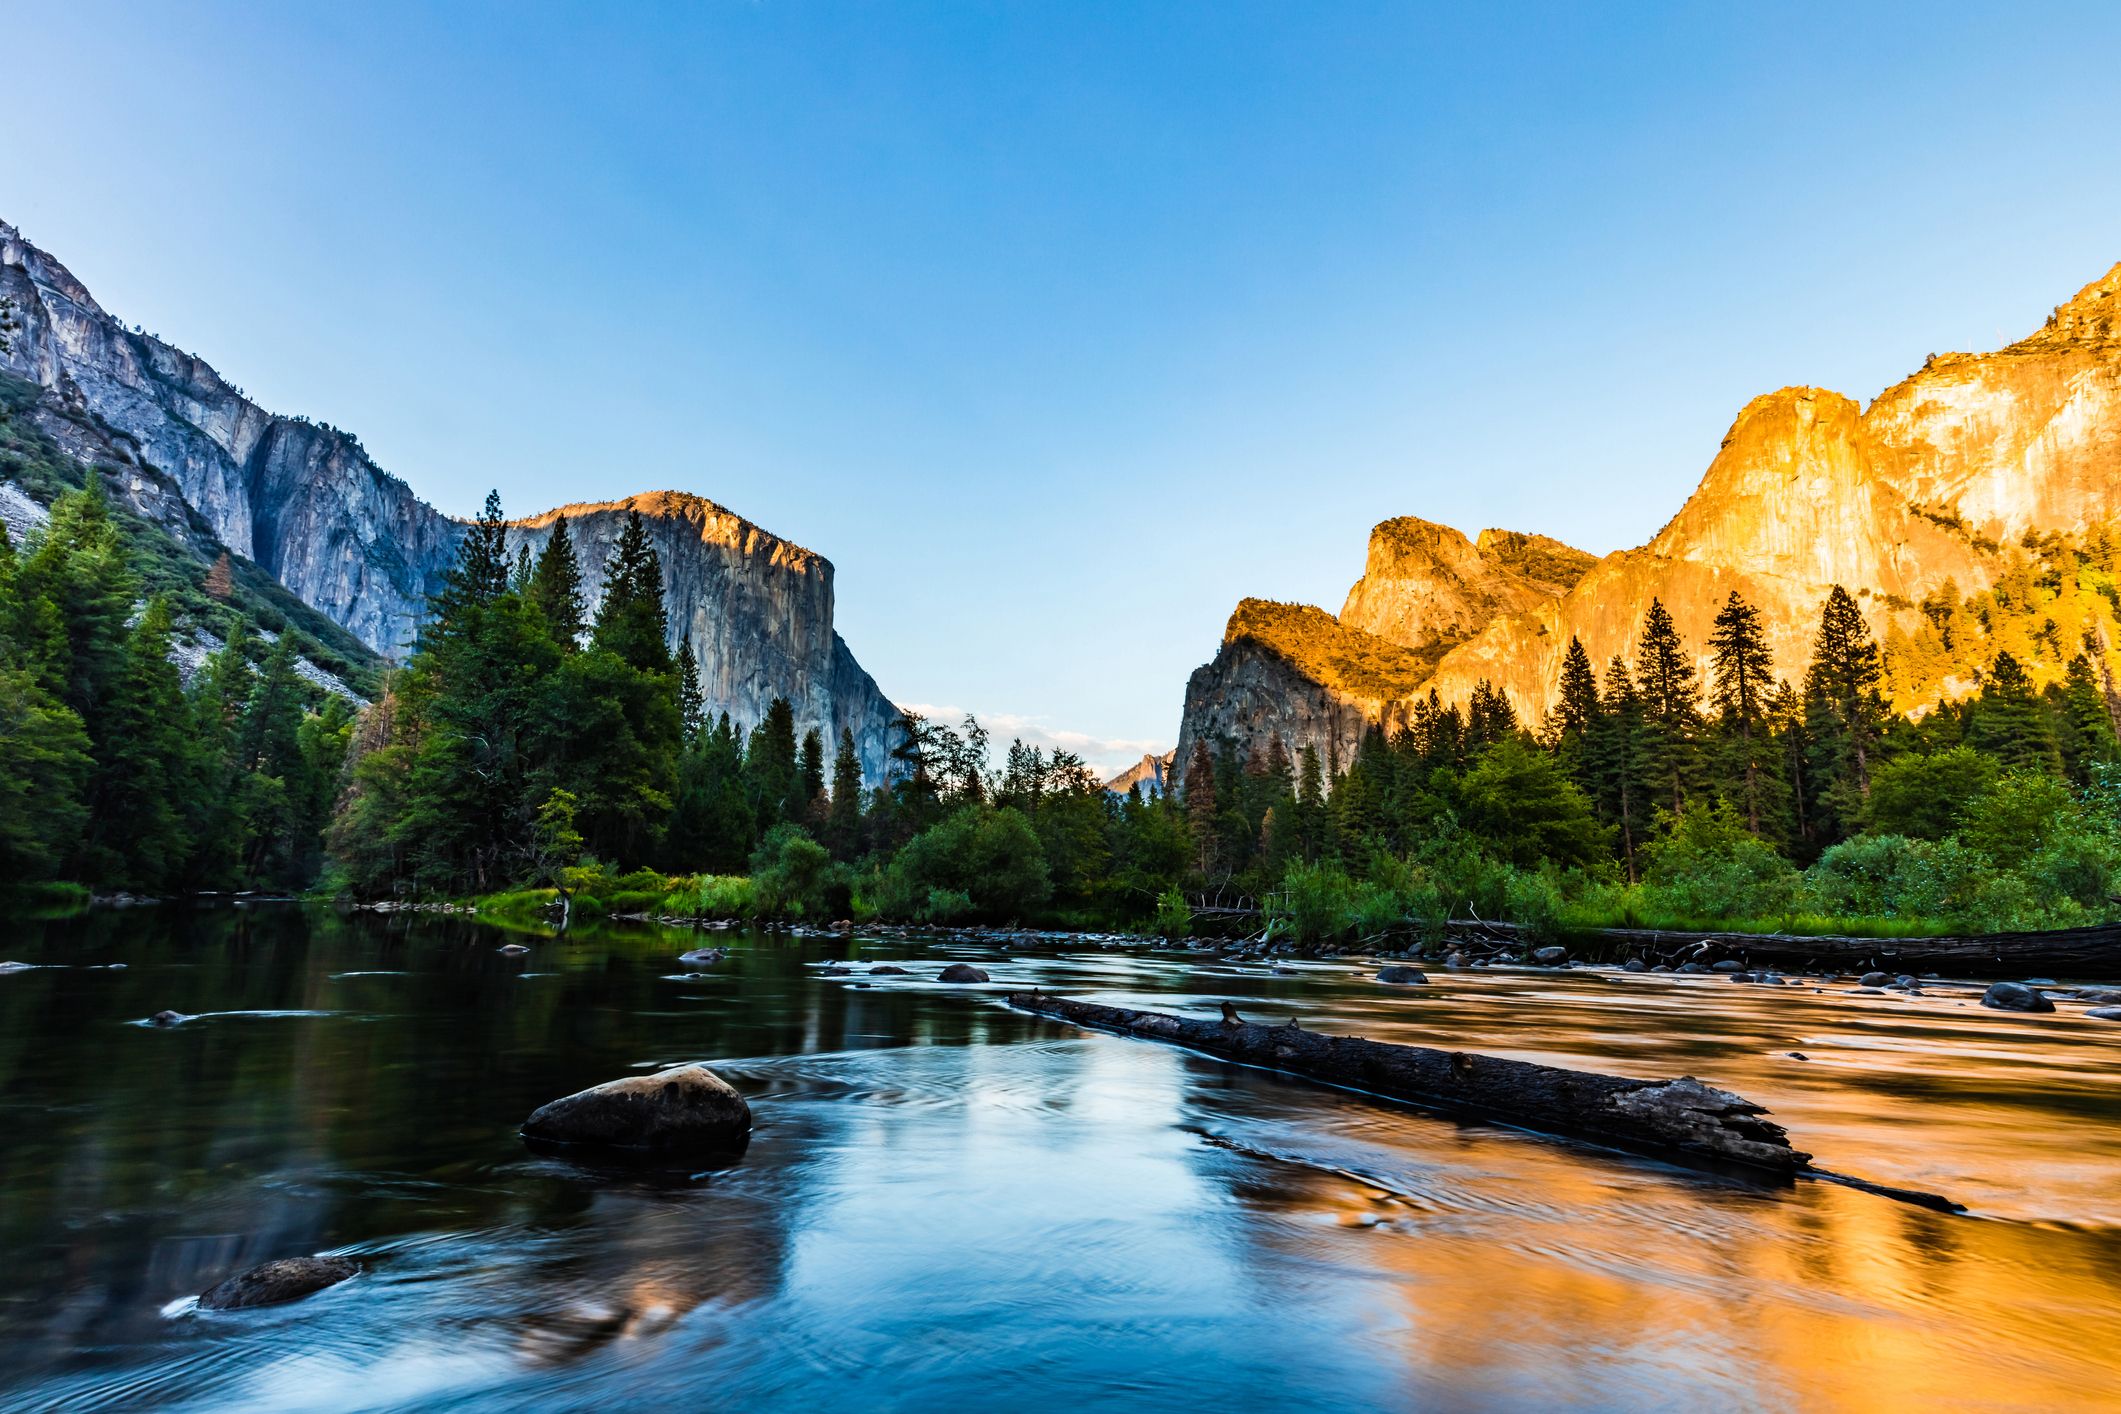 What is the prettiest national park?